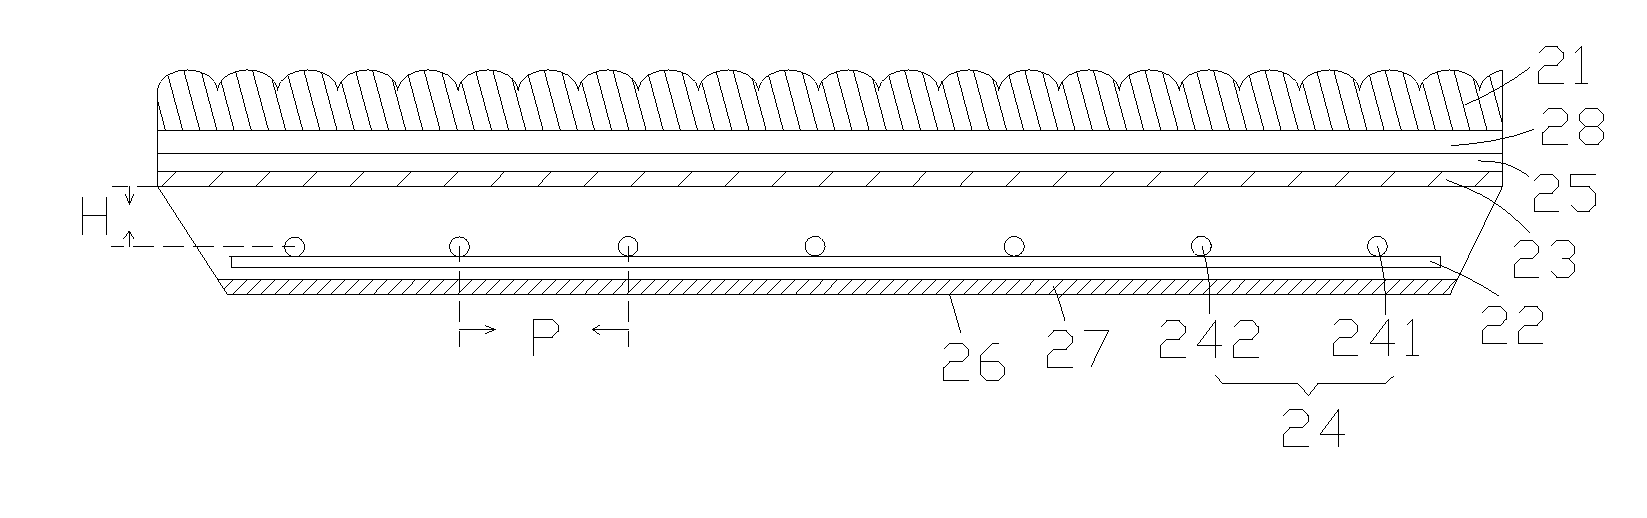 Backlight Module and Liquid Crystal Display Device